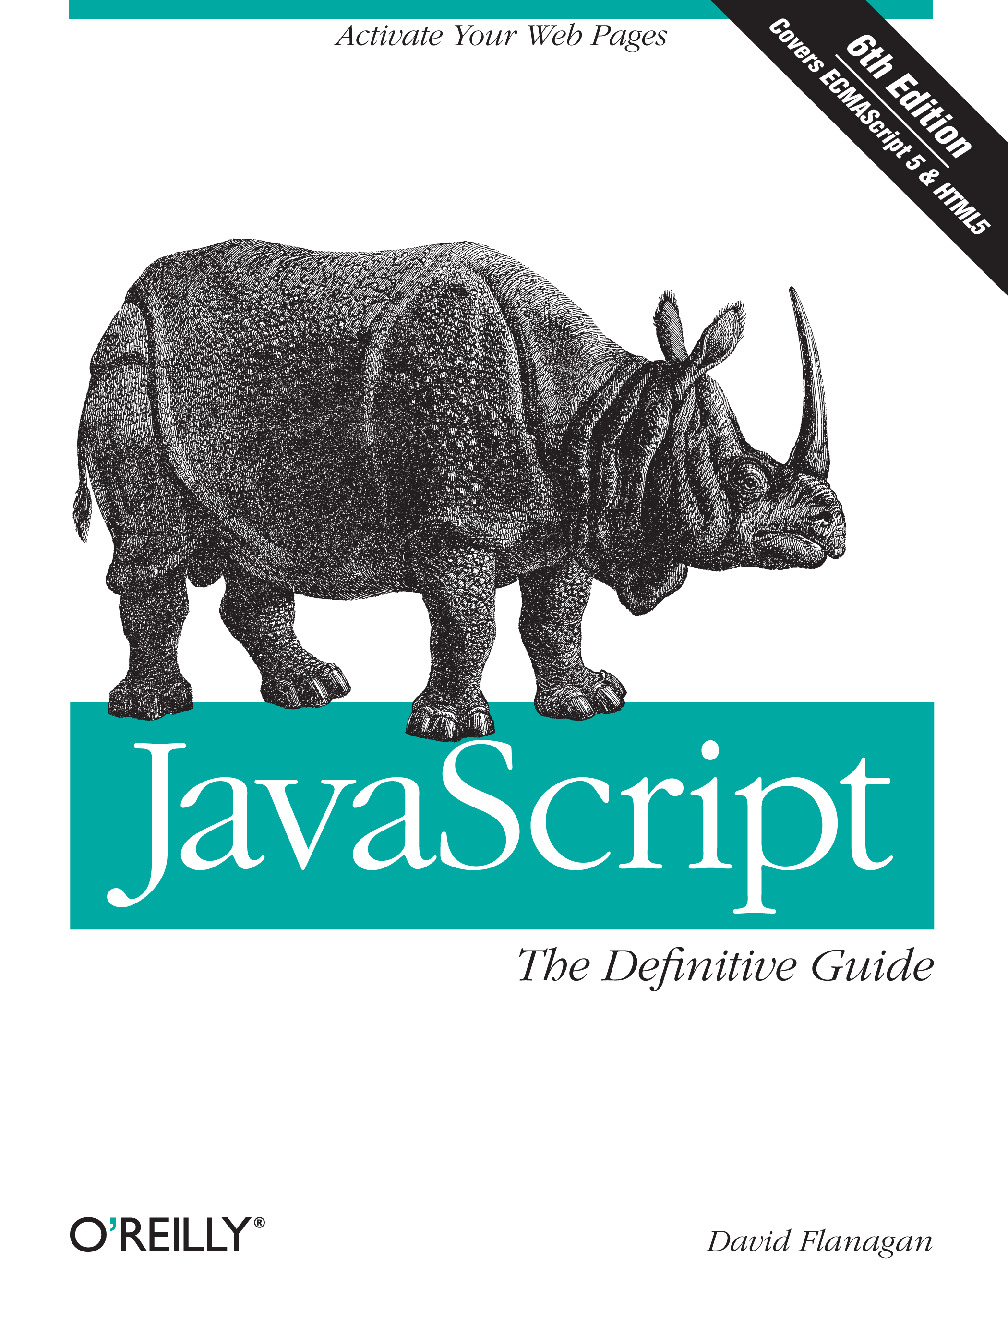 [JavaScript The Definitive Guide Activate Your Web Pages (Definitive Guides) by David Flanagan – 2011]